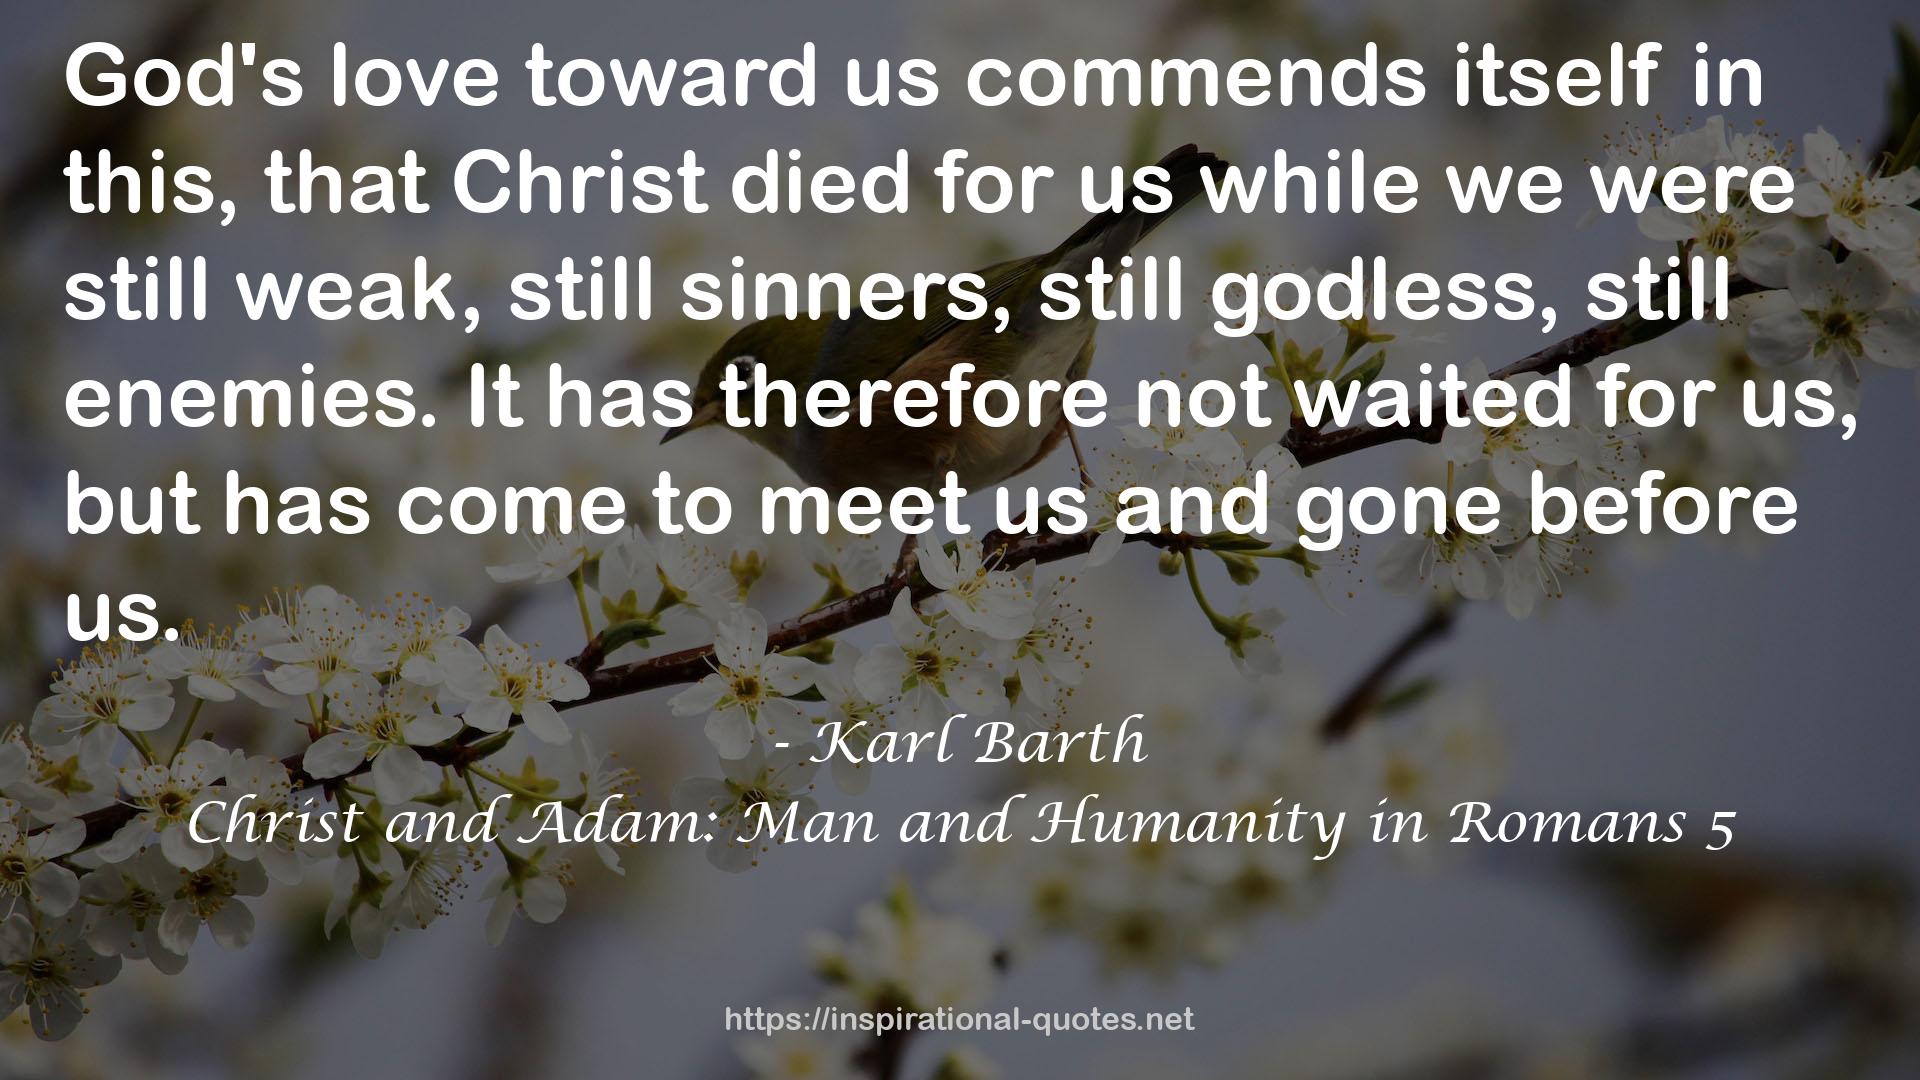 Christ and Adam: Man and Humanity in Romans 5 QUOTES